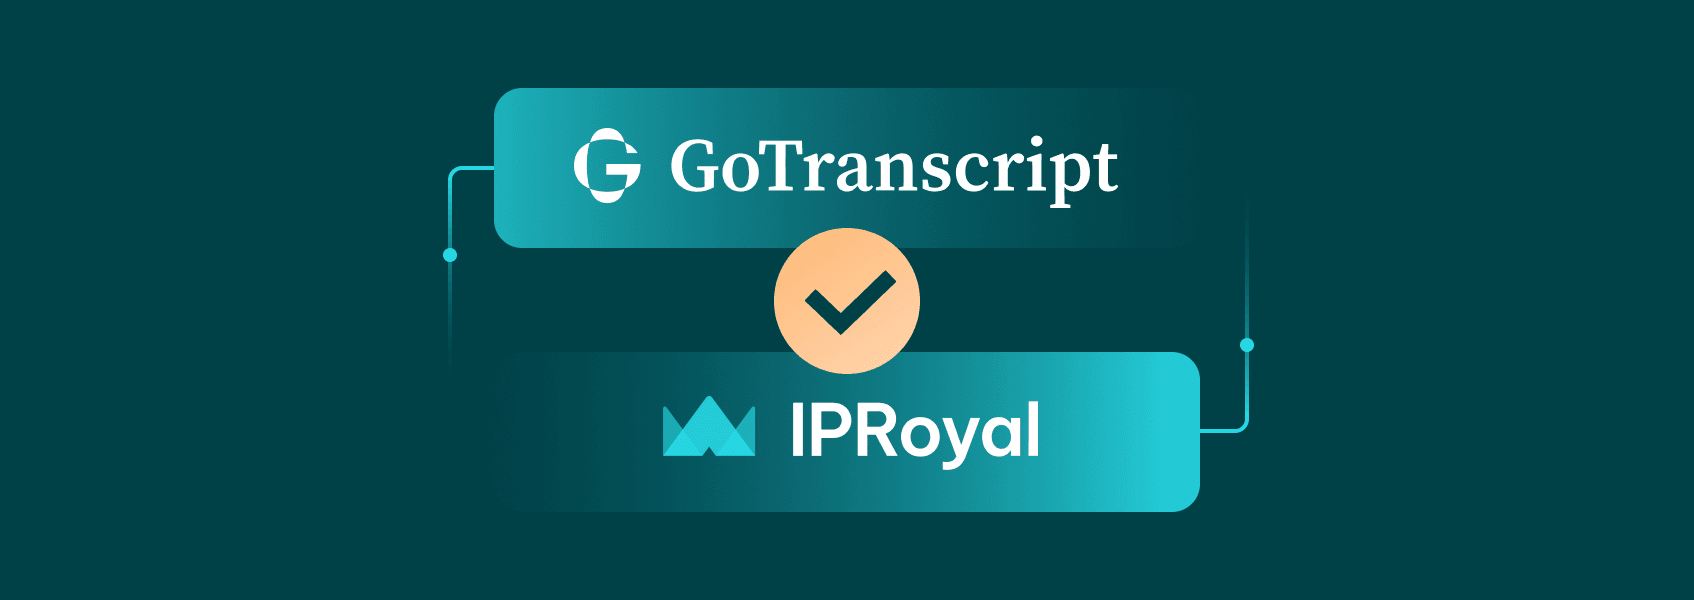 How GoTranscript Uses IPRoyal to Increase Online Visibility and Enhance Operations